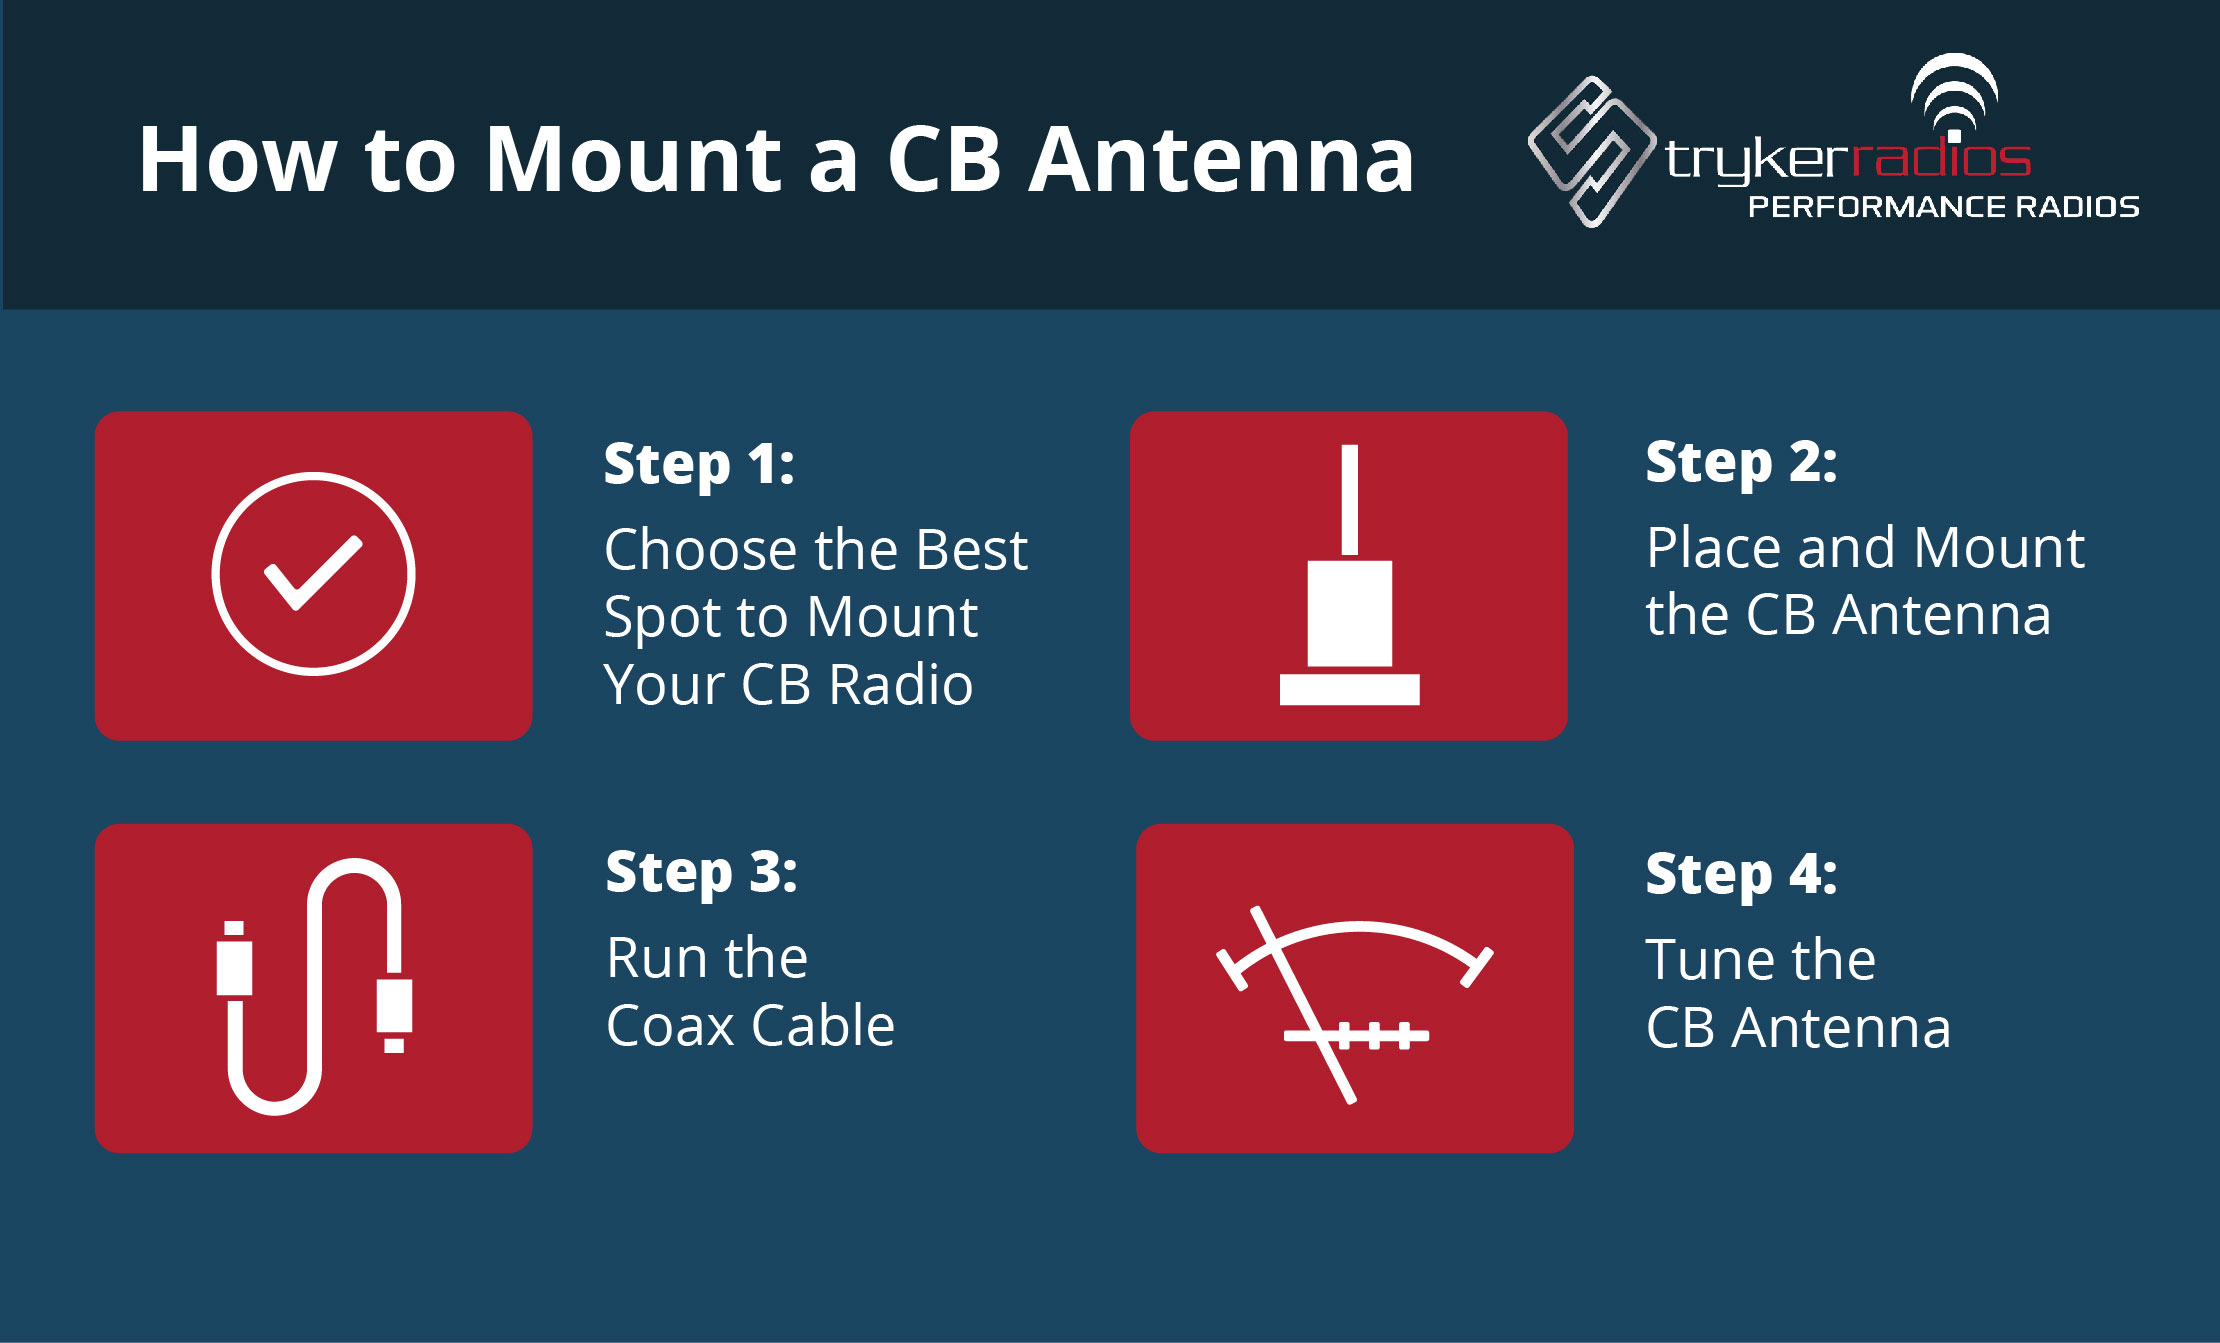 how to mount a cb antenna infographic